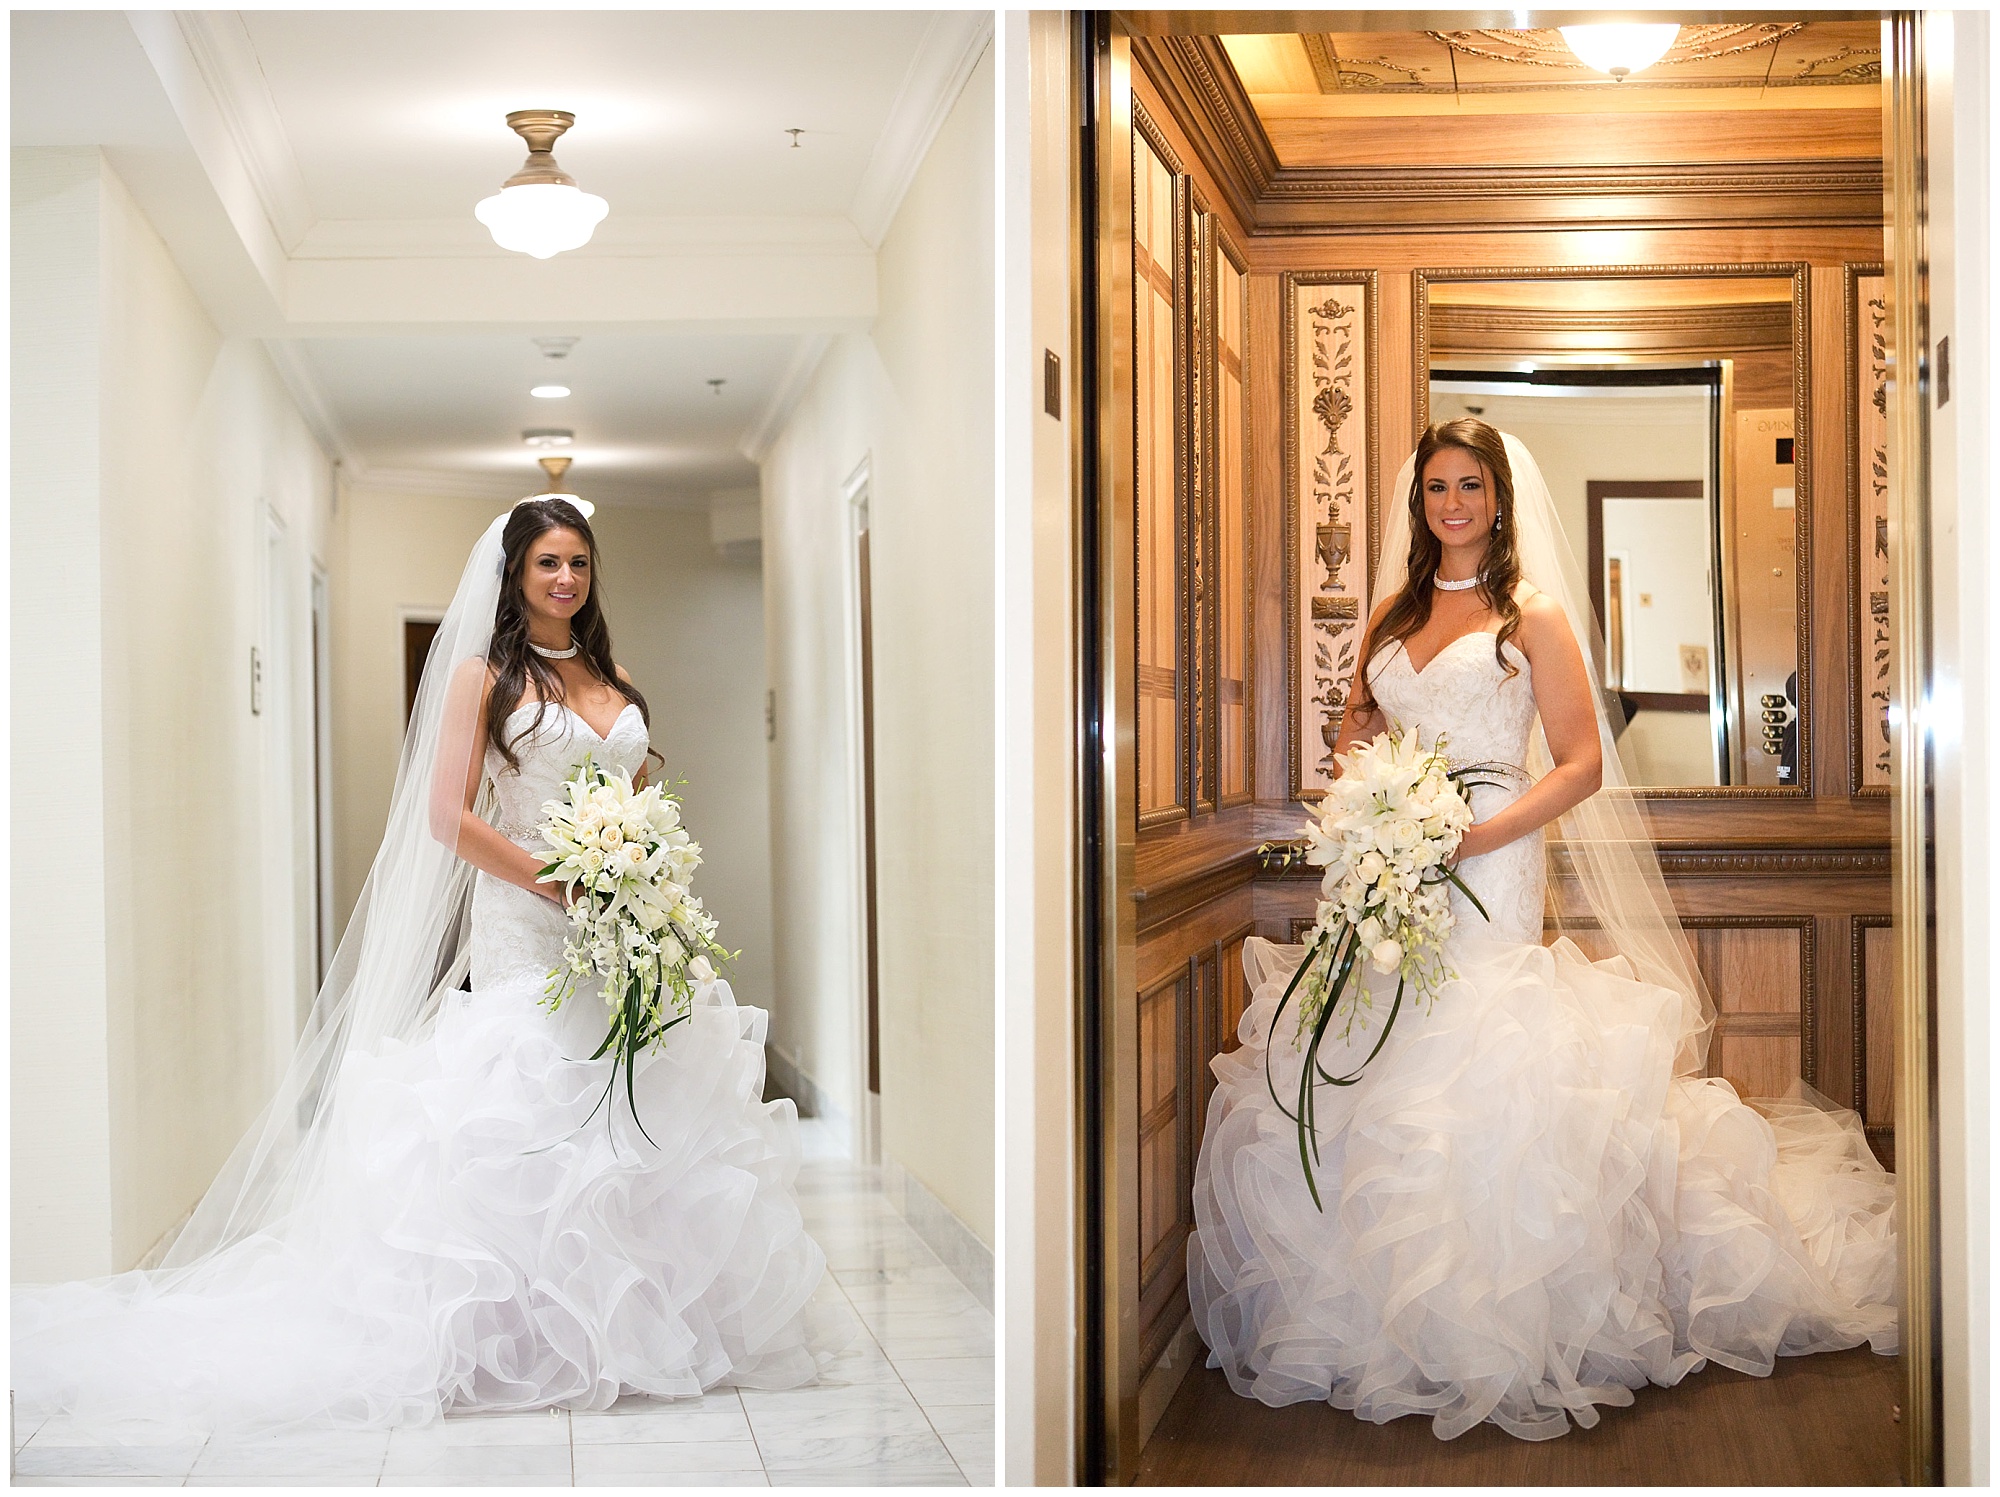 A portrait of a bride in the hotel hallway and elevator.